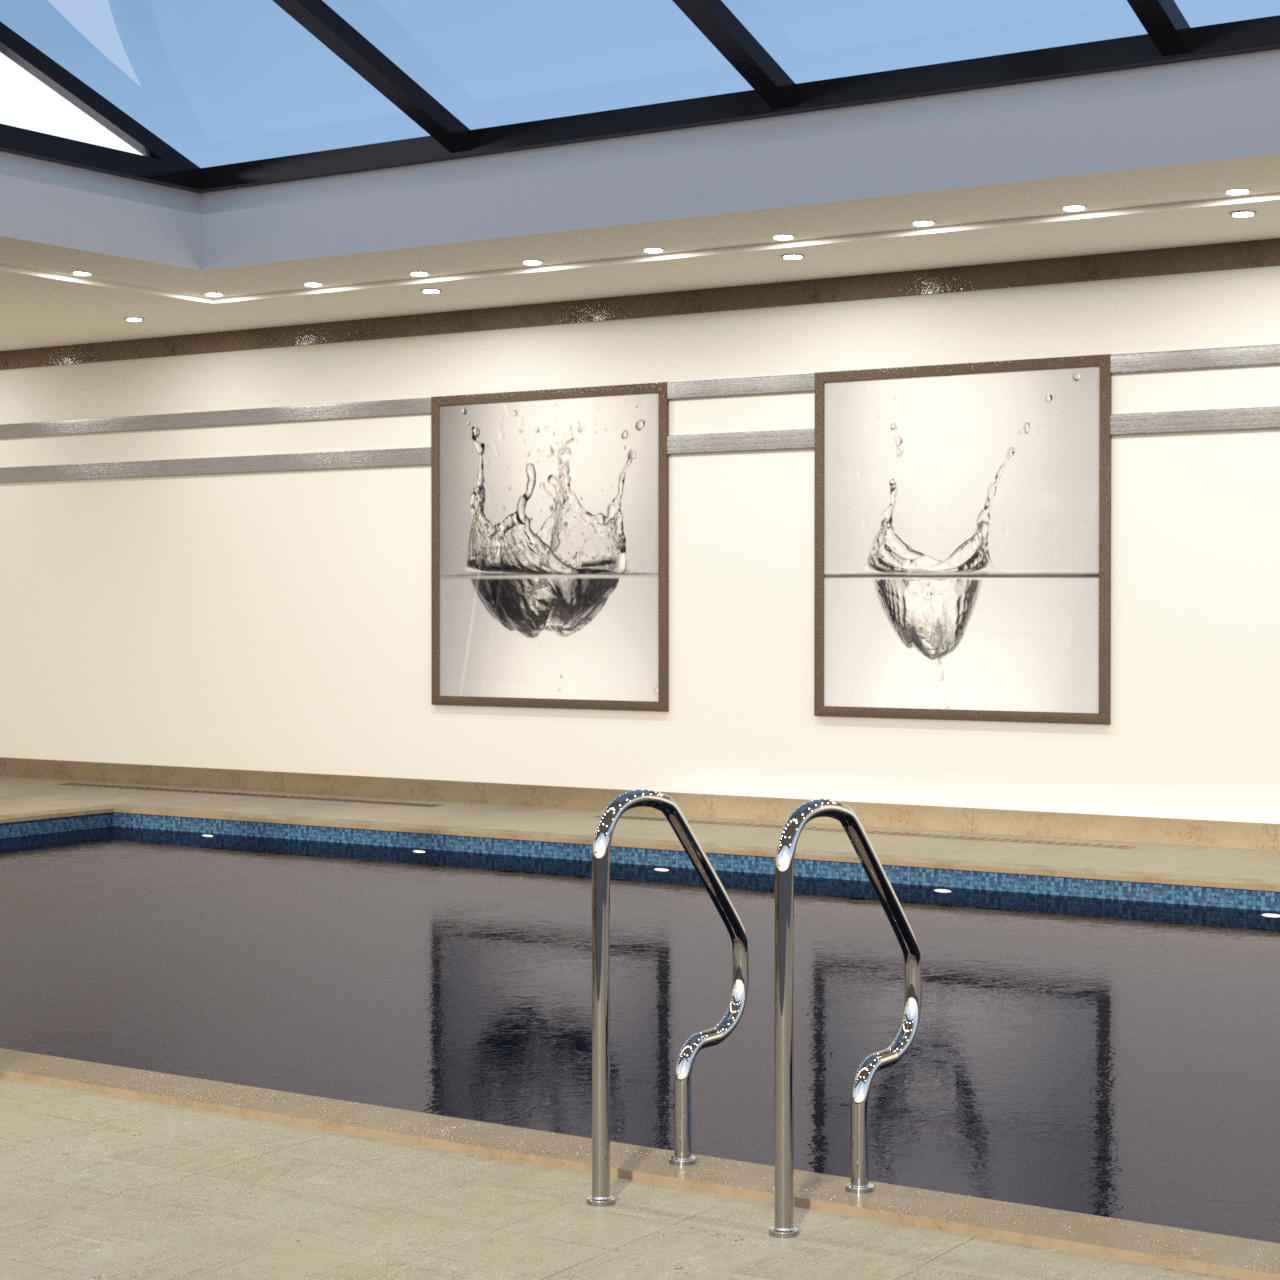 Pool entrance with background showing also two paintings and a glass roof